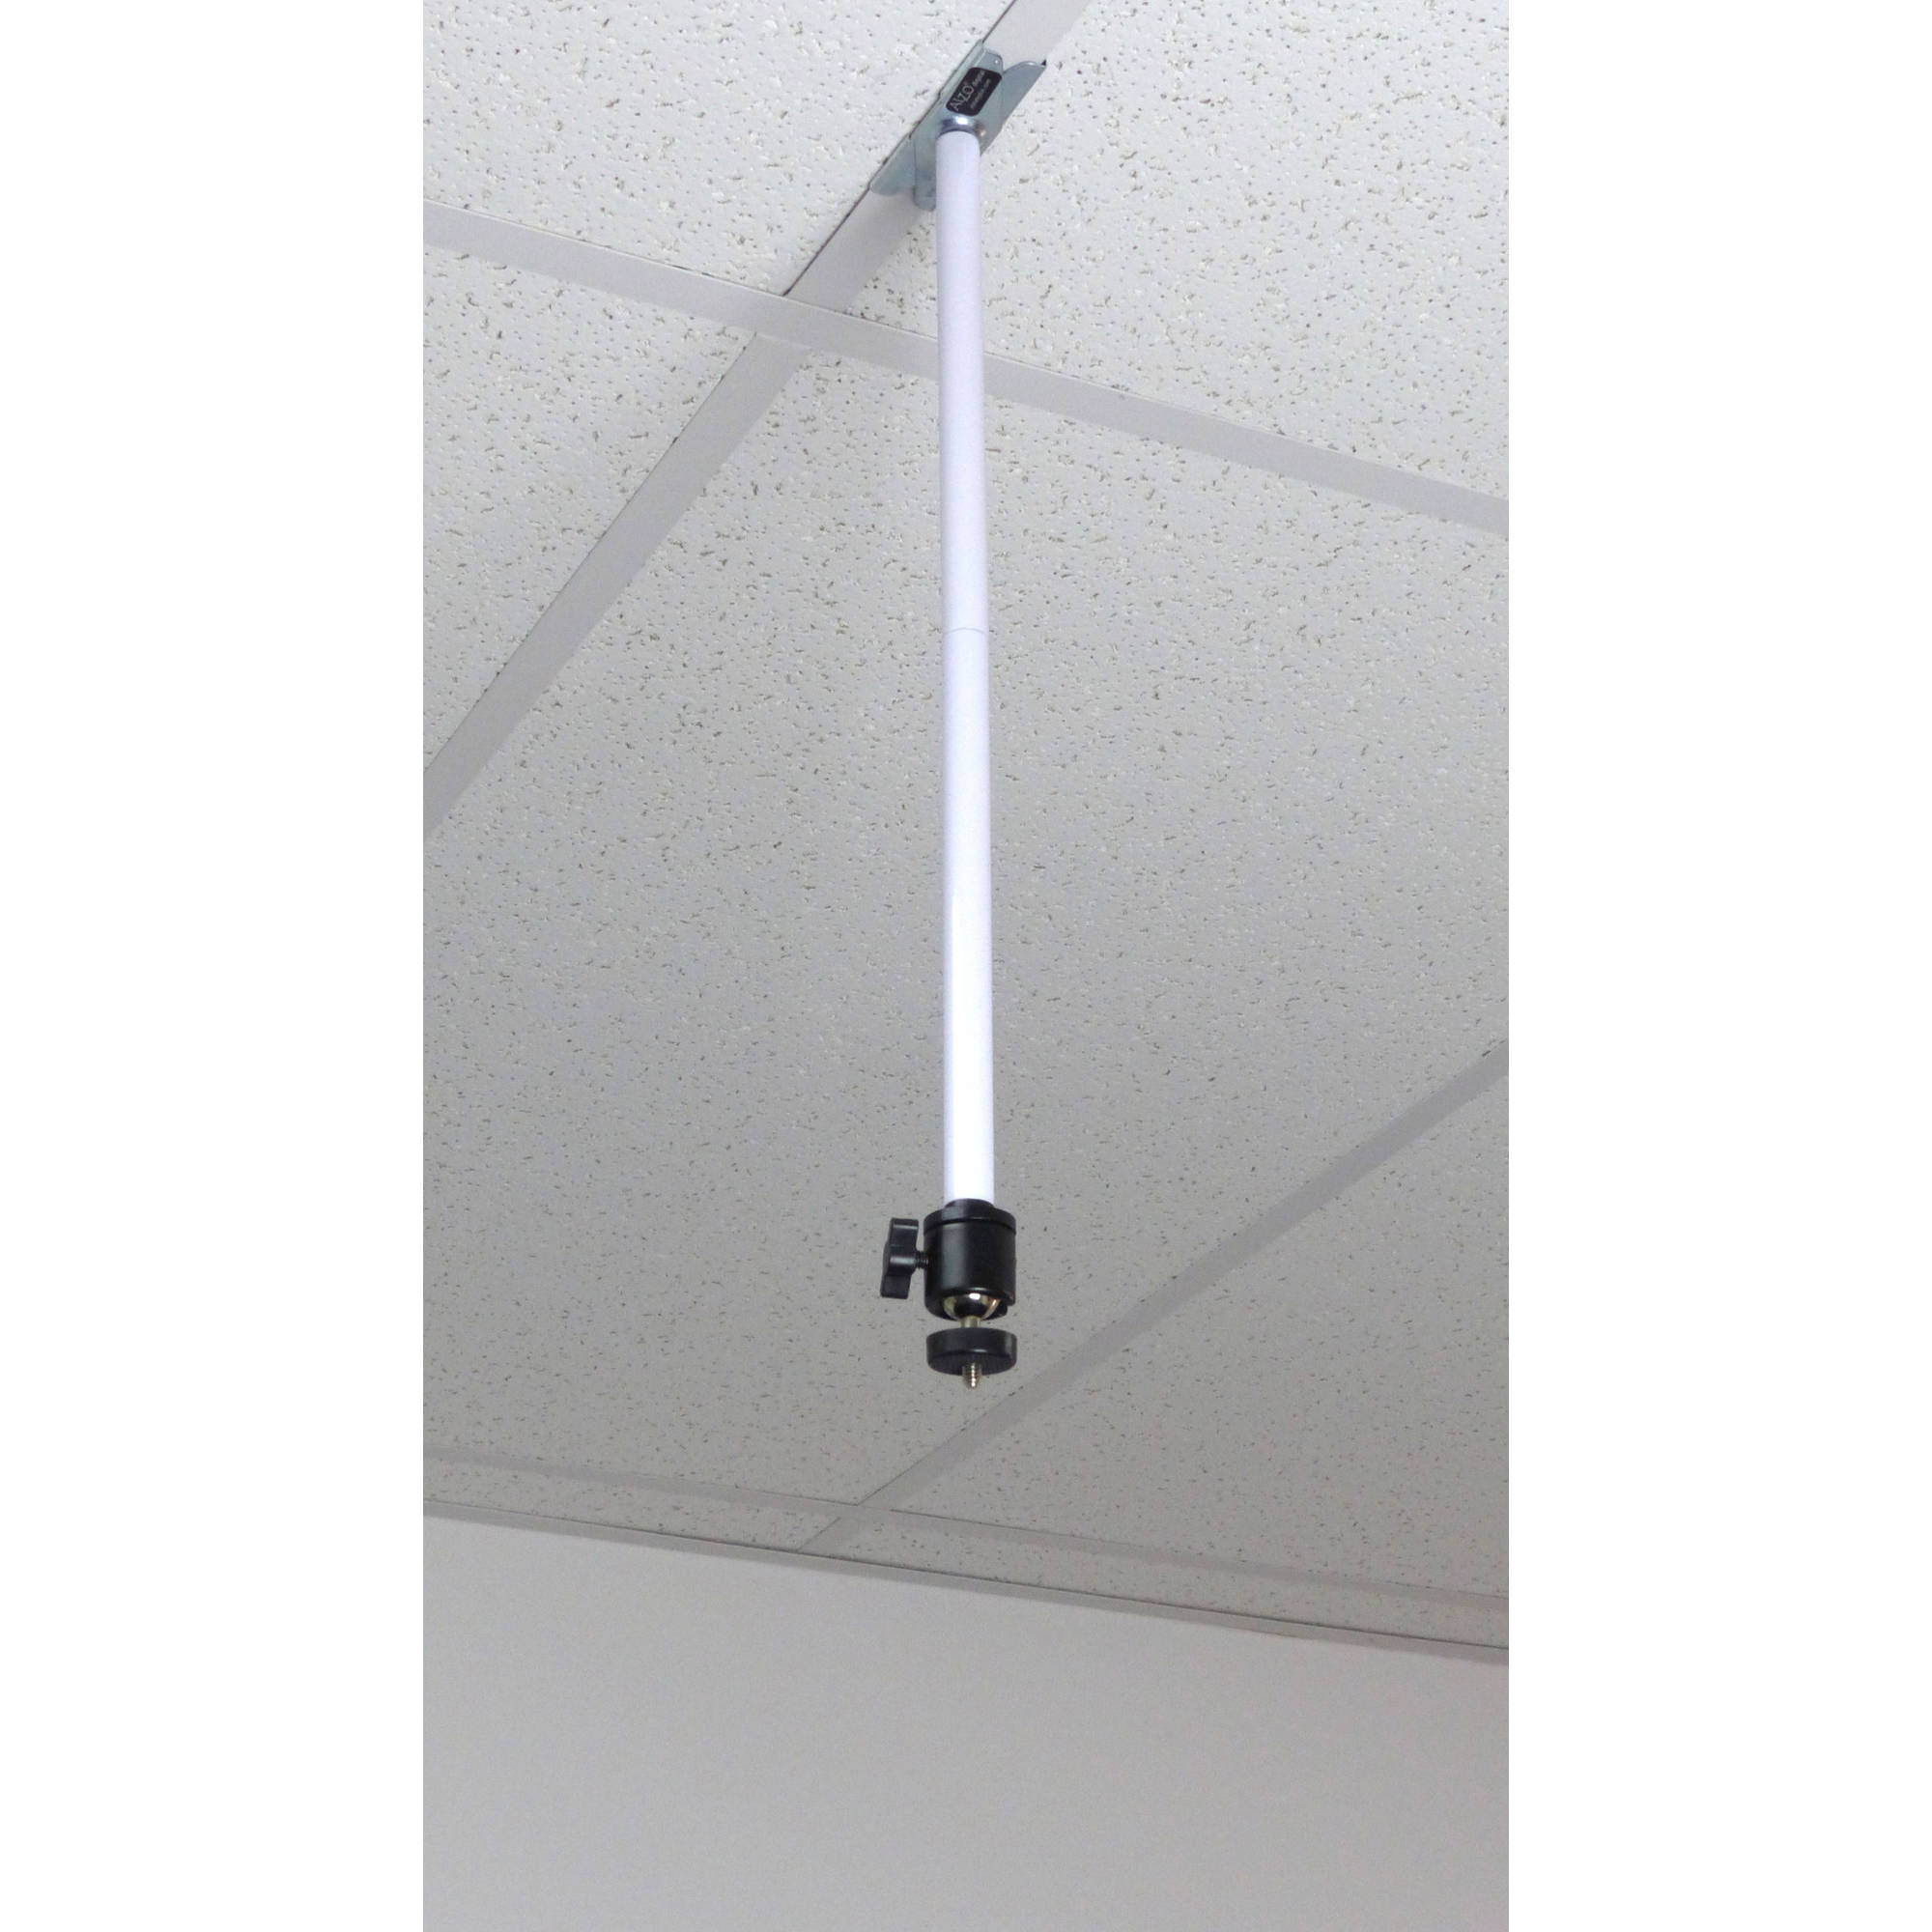 Alzo Suspended Drop Ceiling Mount For Pico Video Projector